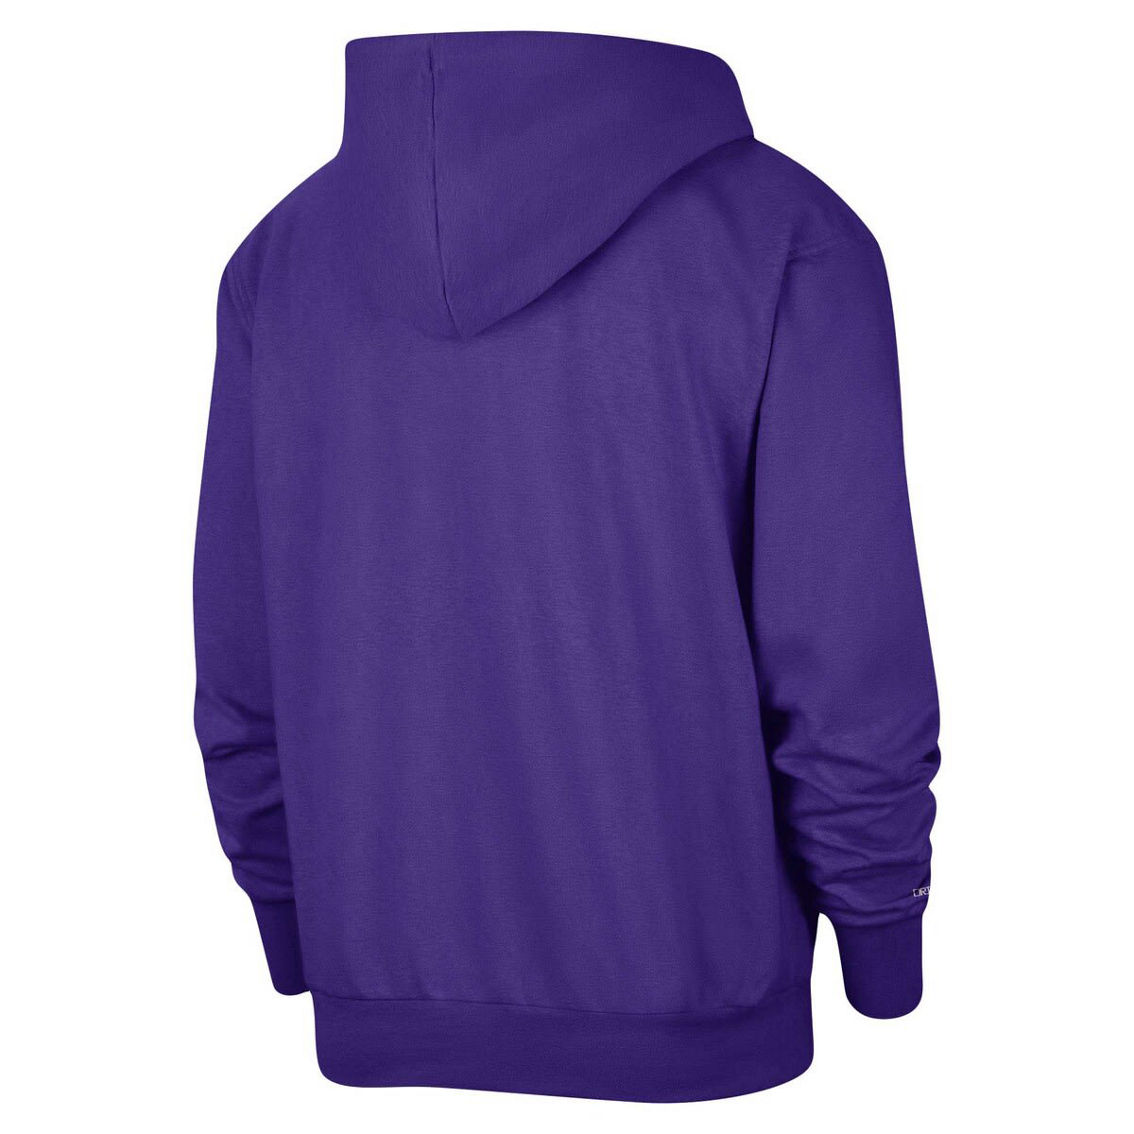 Nike Men's Purple Los Angeles Lakers Authentic Performance Pullover Hoodie - Image 4 of 4